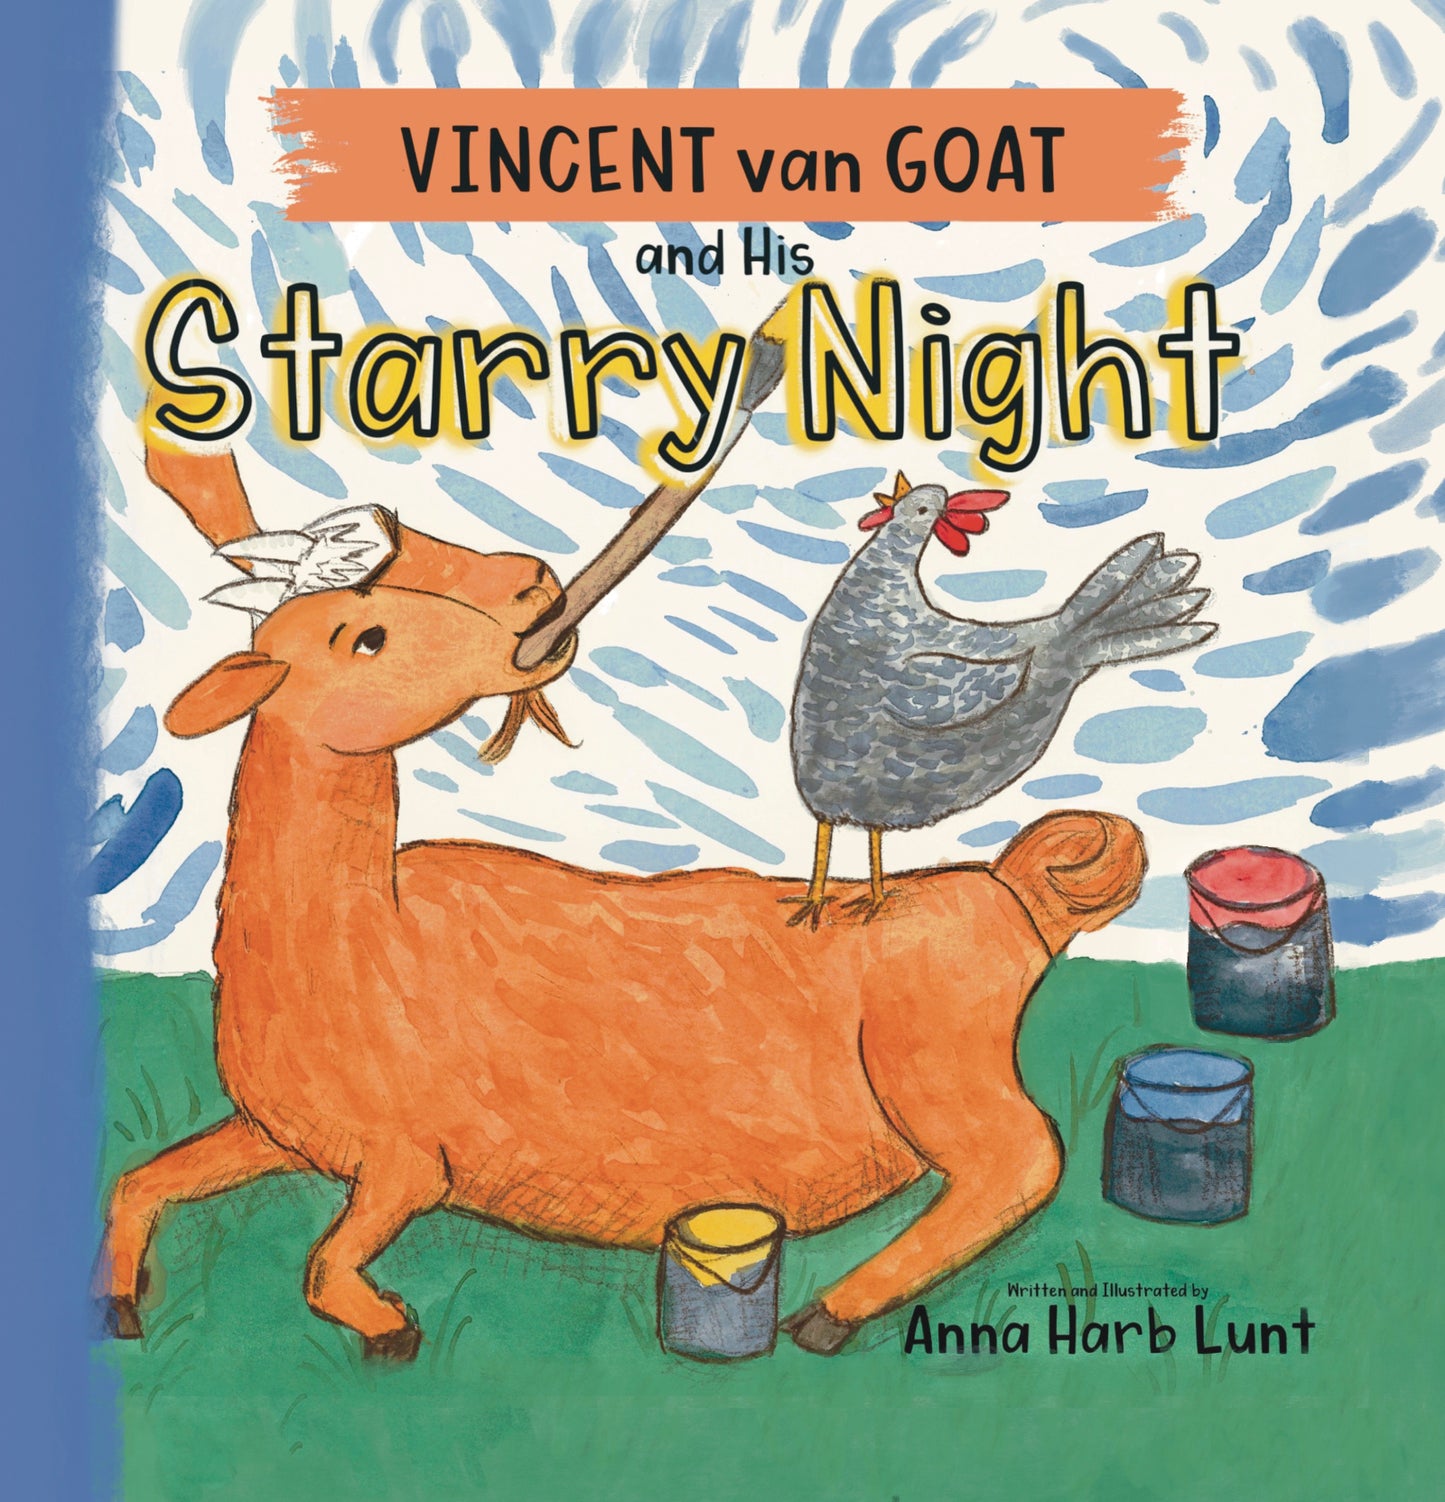 Vincent van Goat and His Starry Night (Paperback)